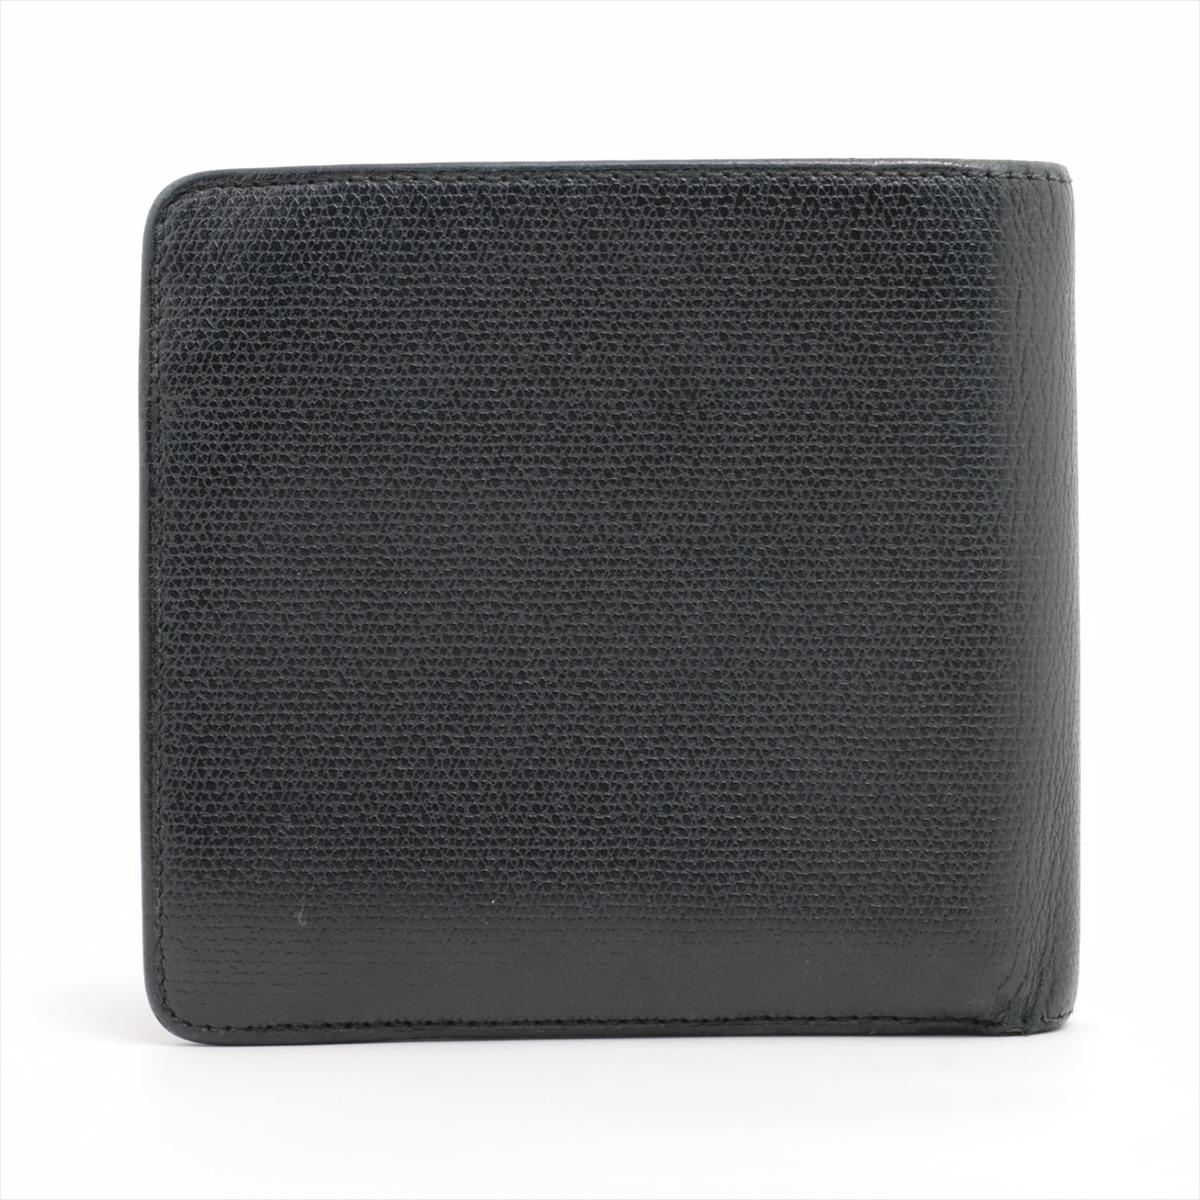 Chanel CC Logo Button Leather Bi fold Wallet Black In Good Condition For Sale In Indianapolis, IN